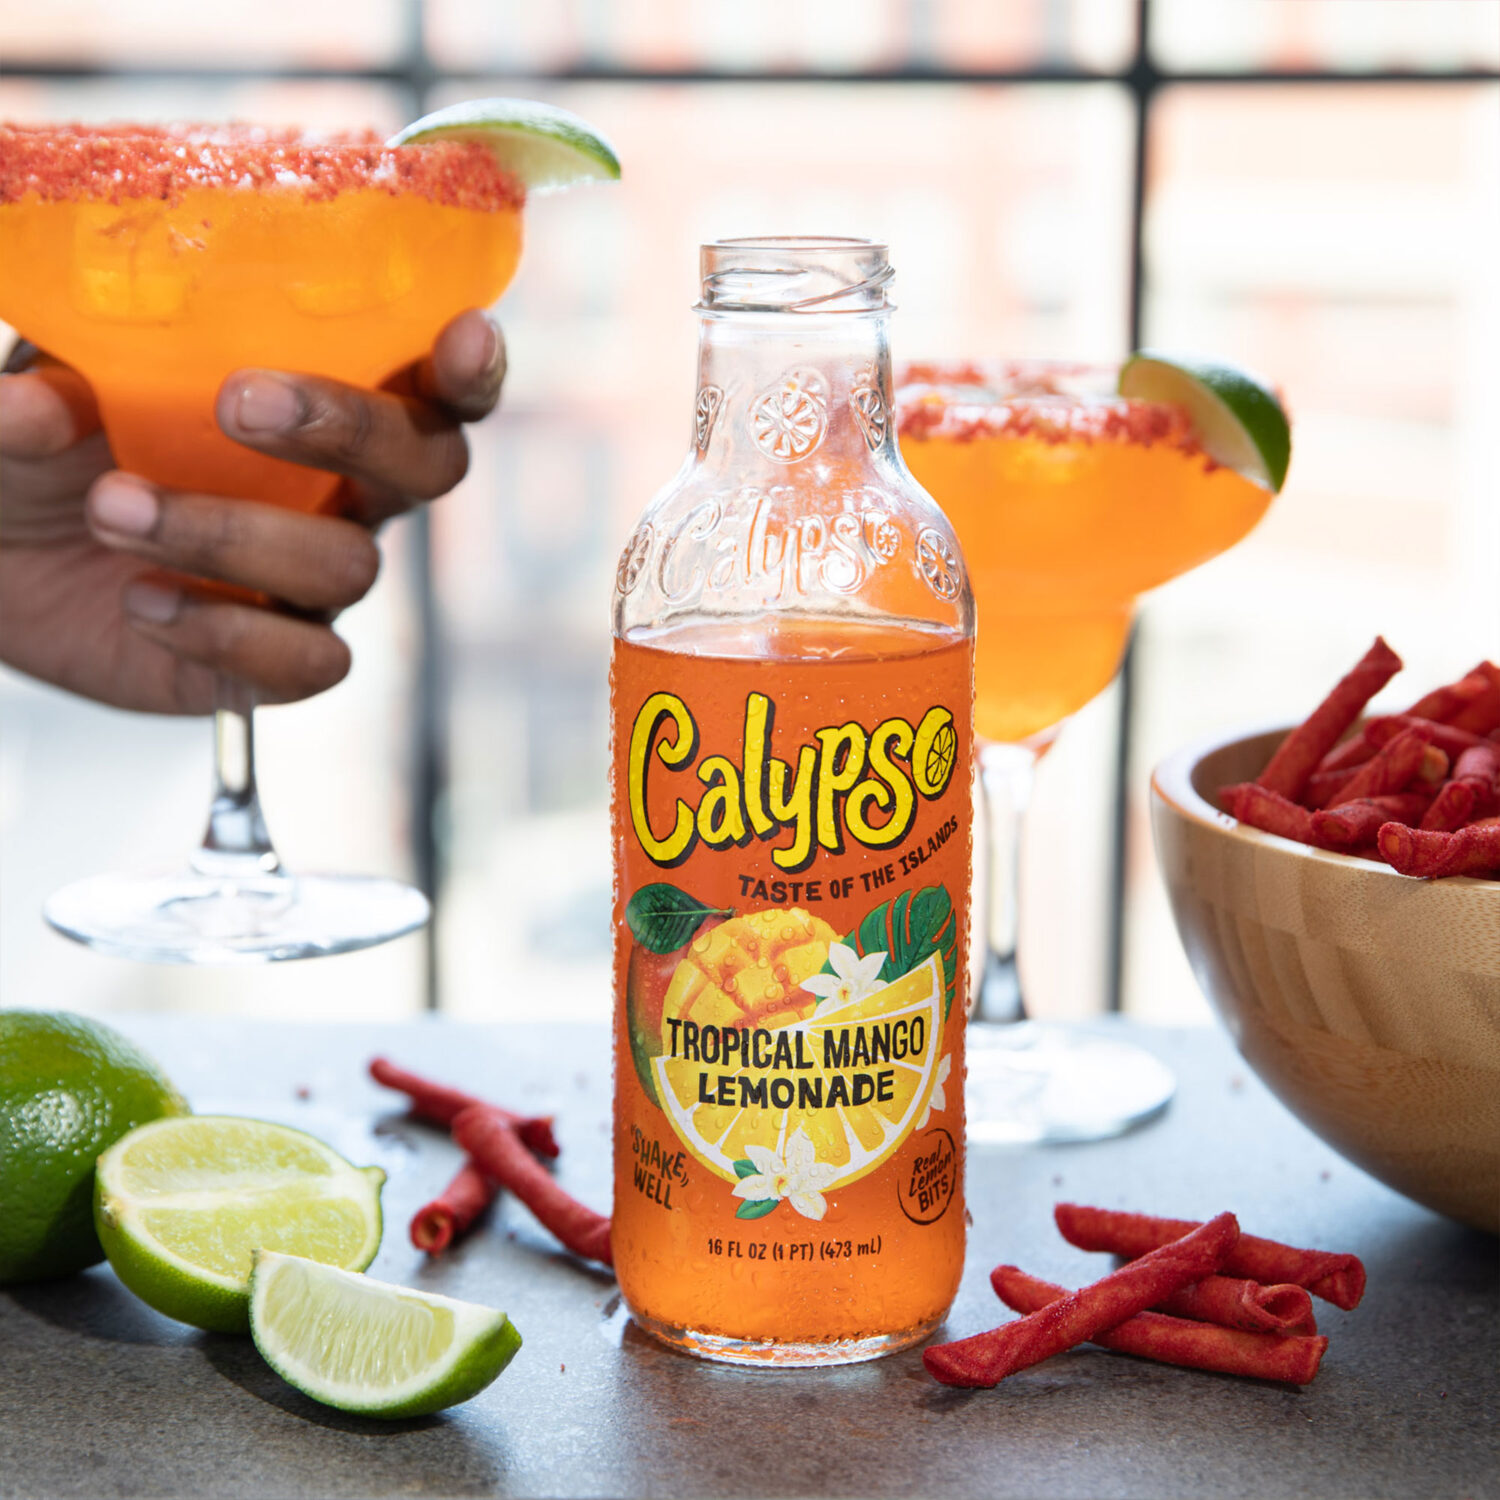 A bottle of Calypso Tropical Mango Lemonade next to a bowl of Takis and a cocktail.